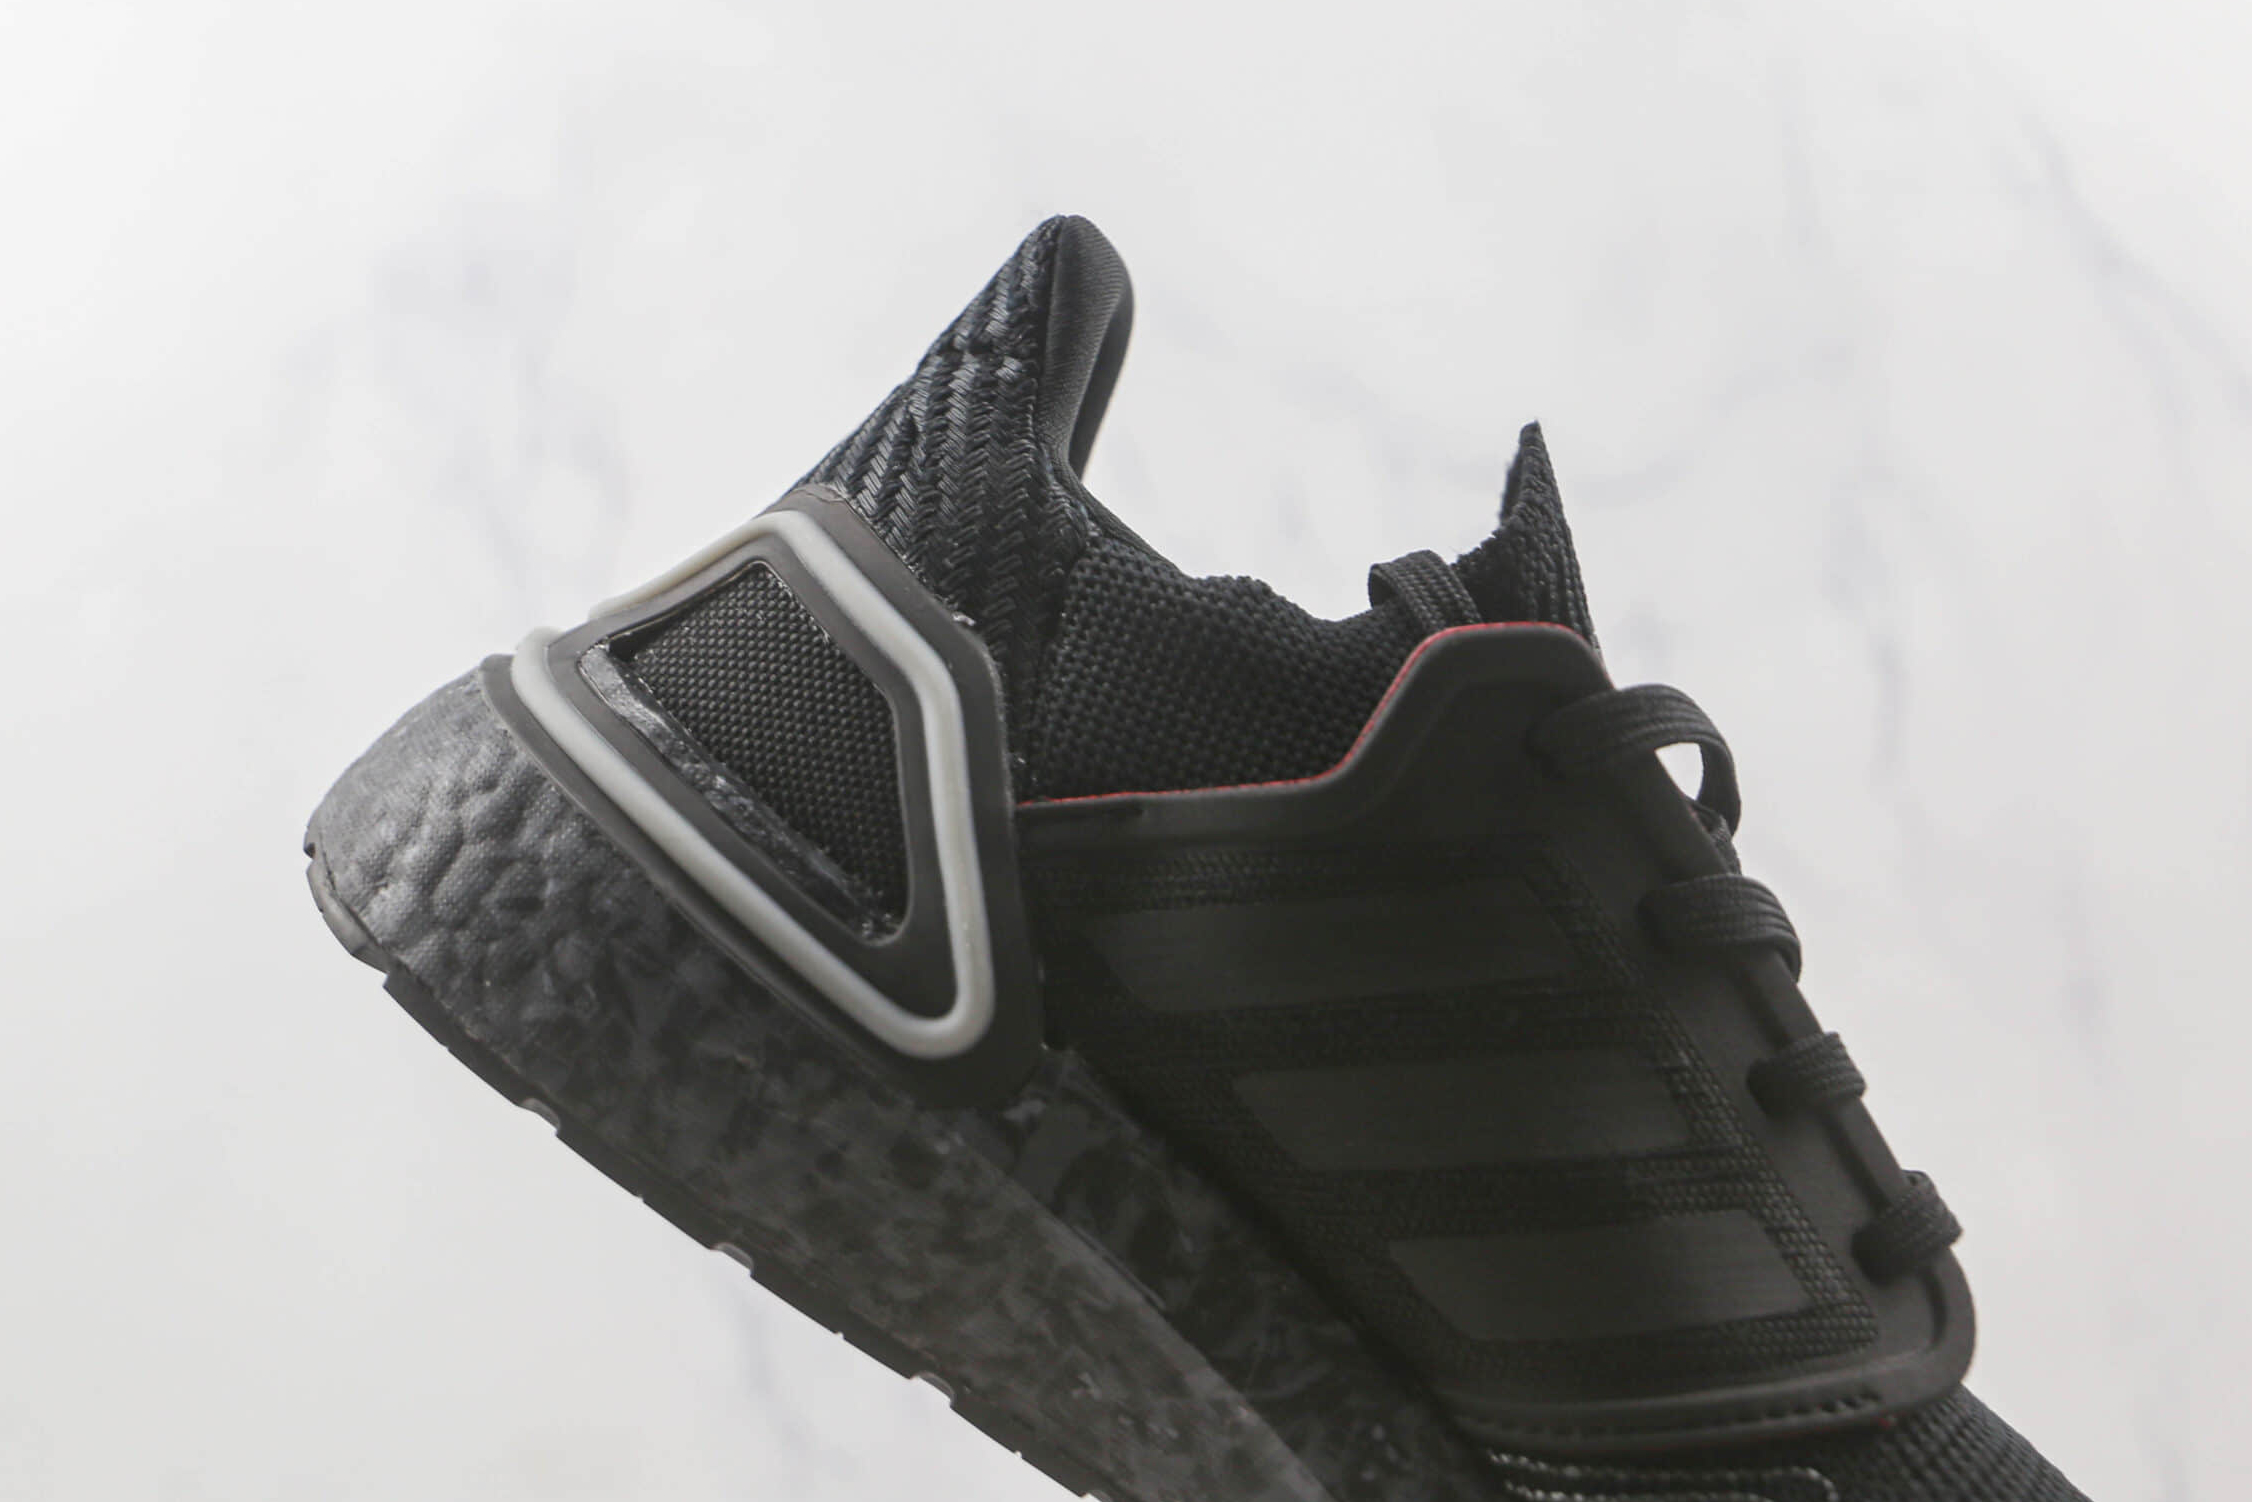 Adidas James Bond x UltraBoost 20 - No Time To Die - Core Black FY0646